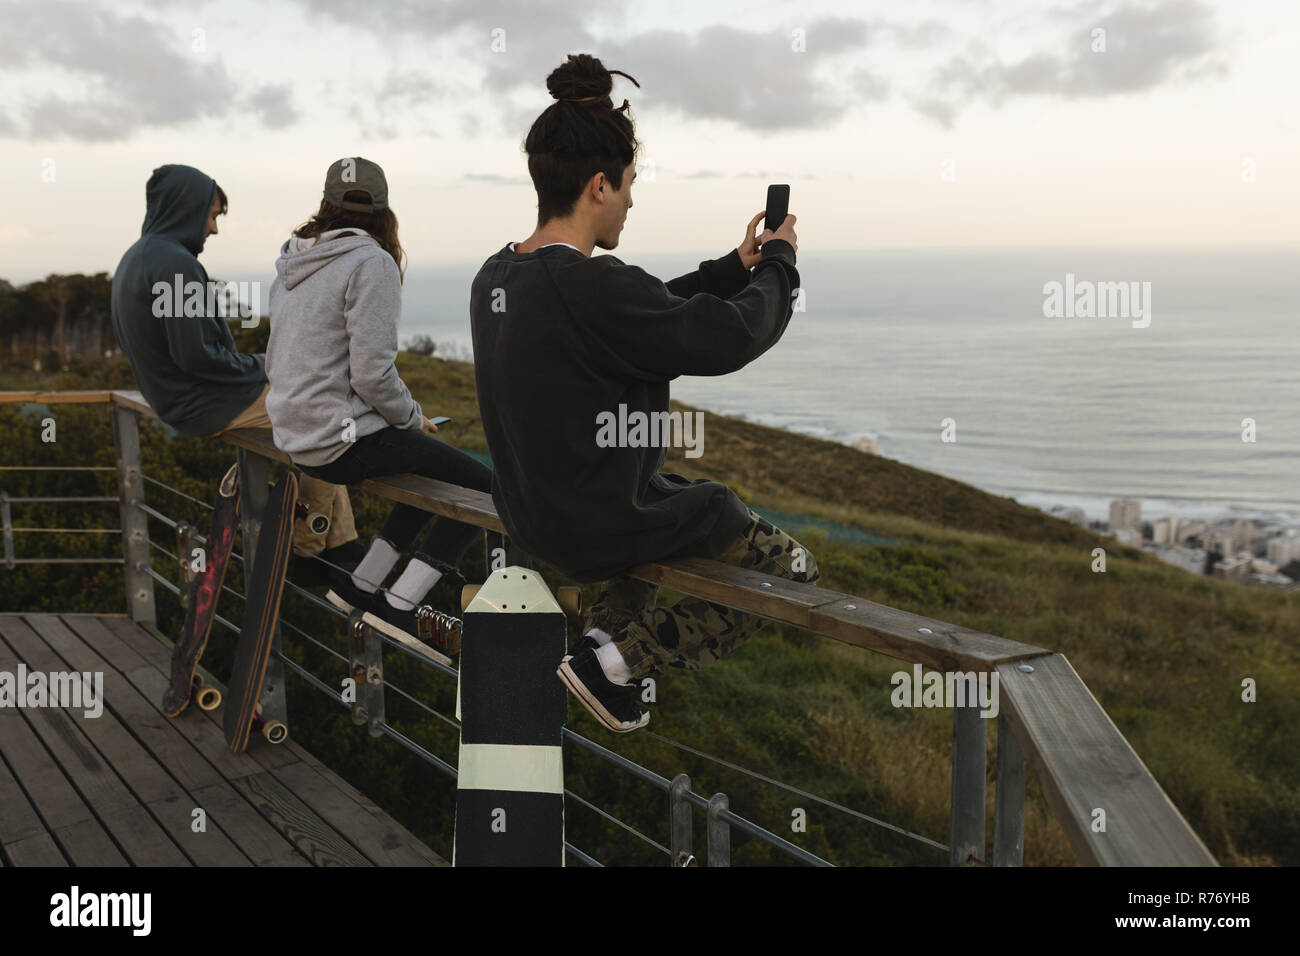 Skateboarders sitting on railing at observation point Stock Photo